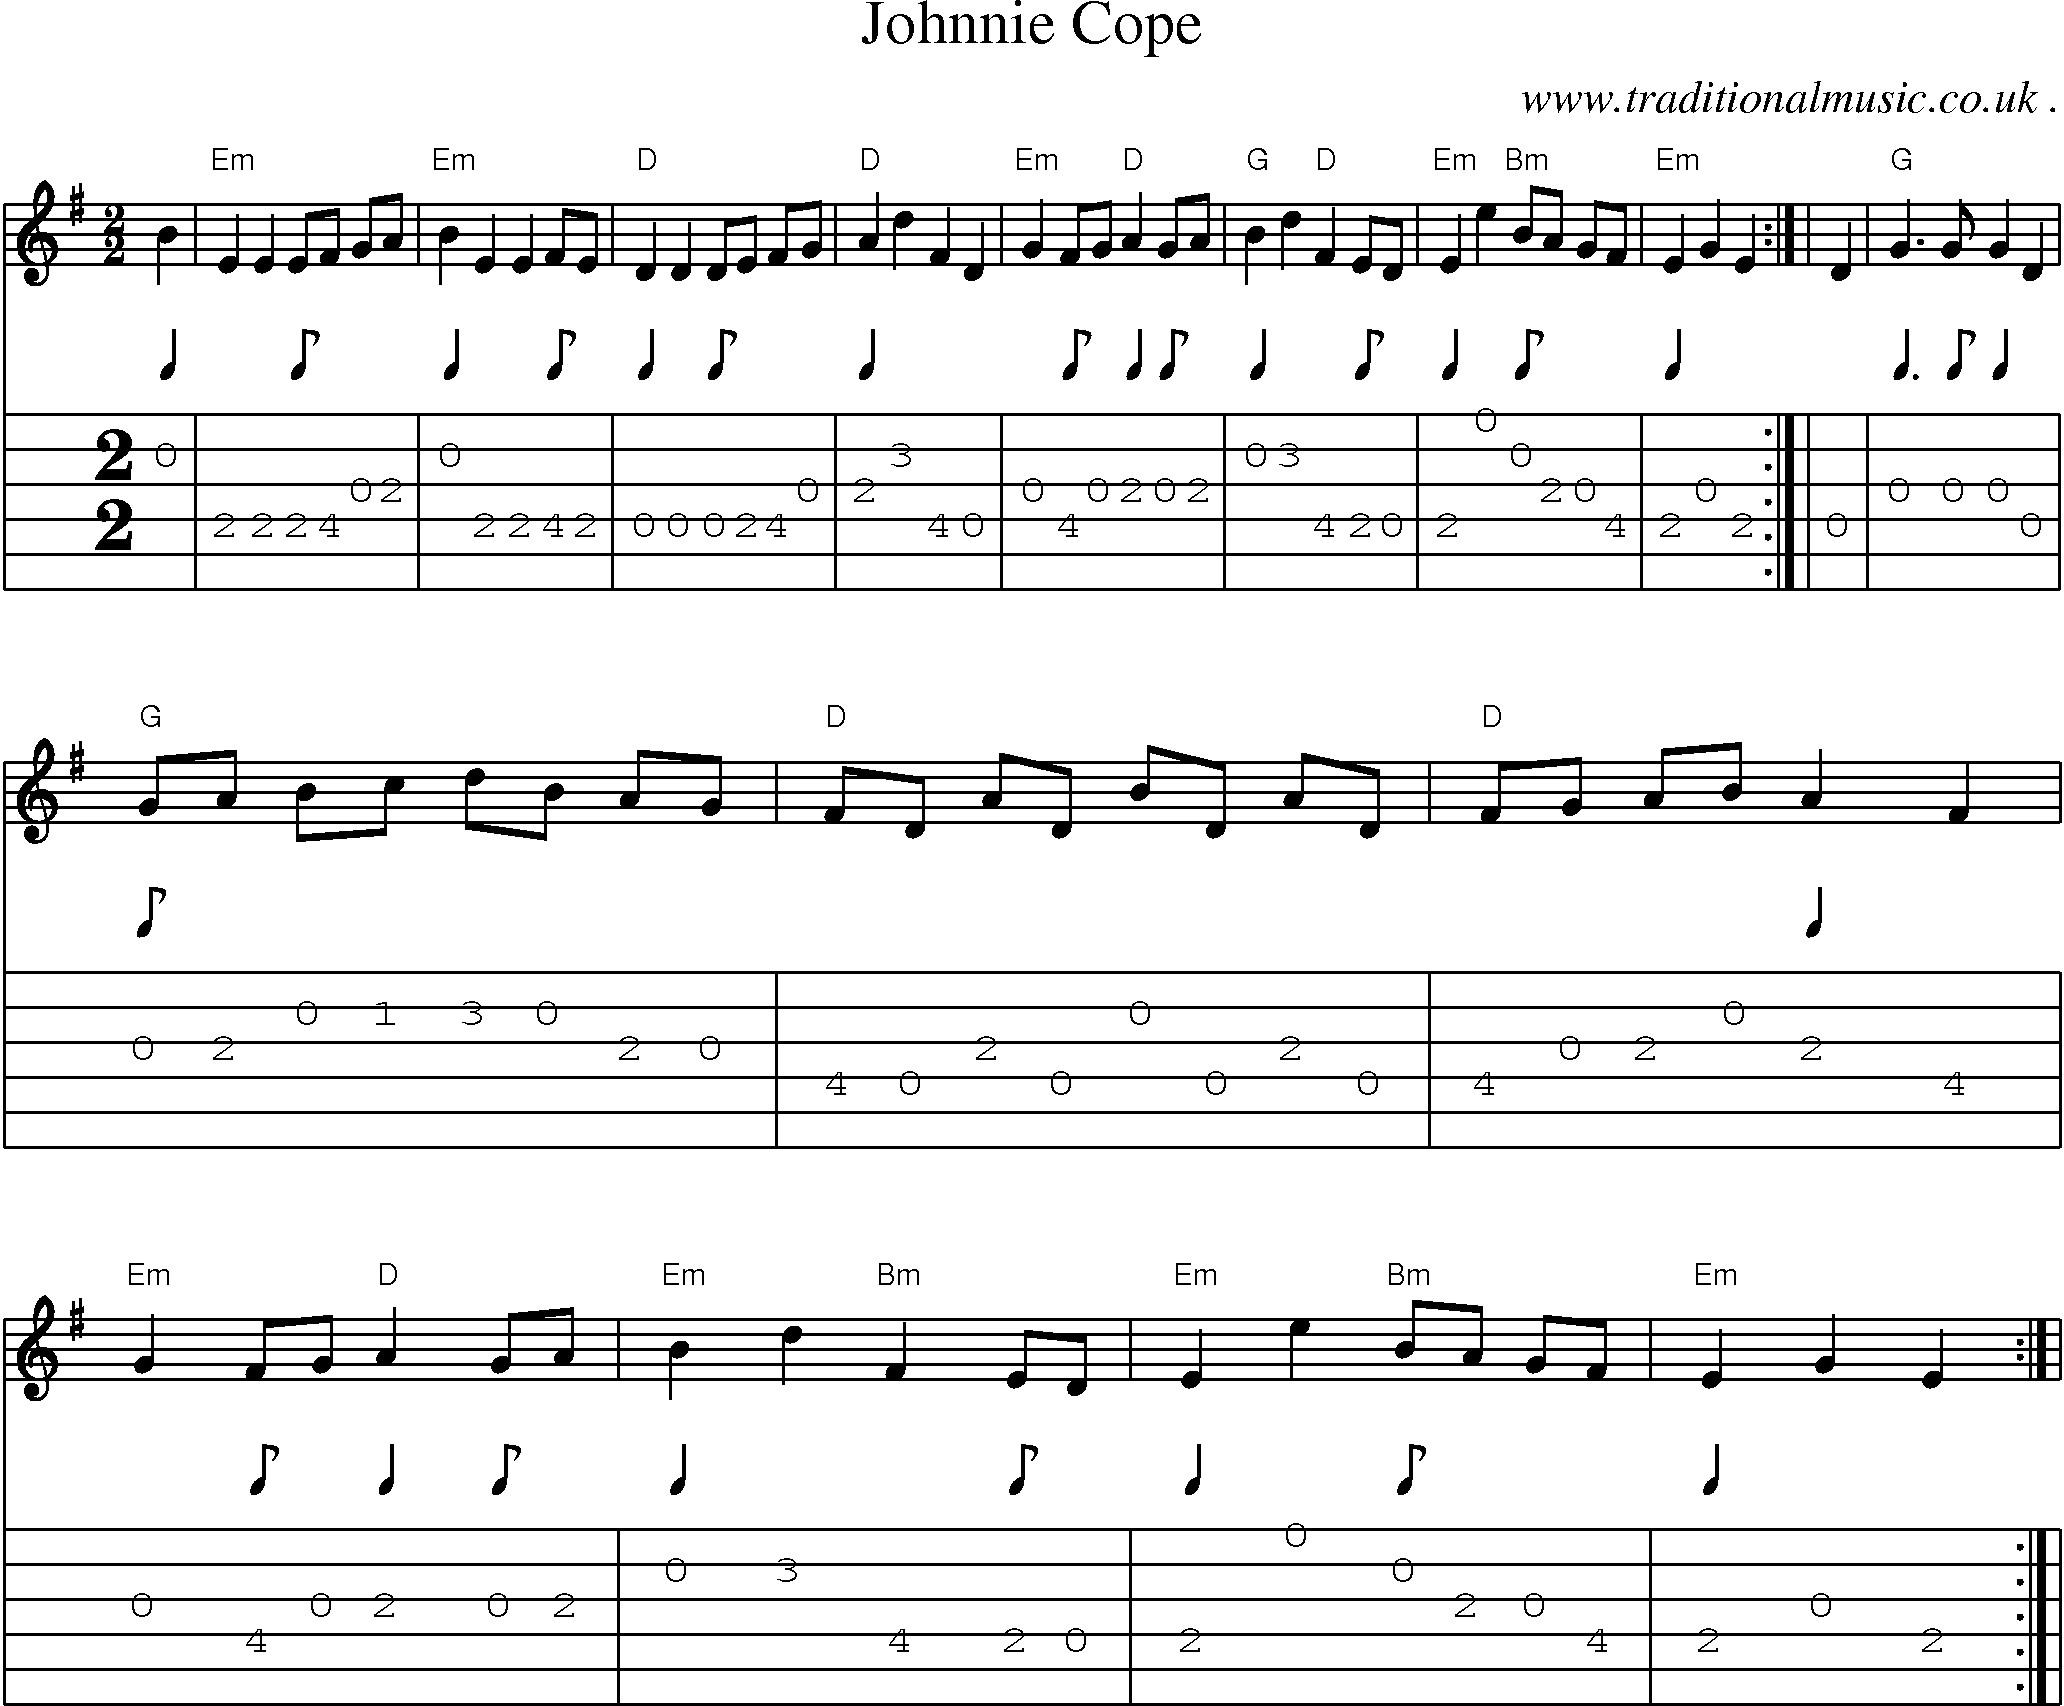 Sheet-music  score, Chords and Guitar Tabs for Johnnie Cope